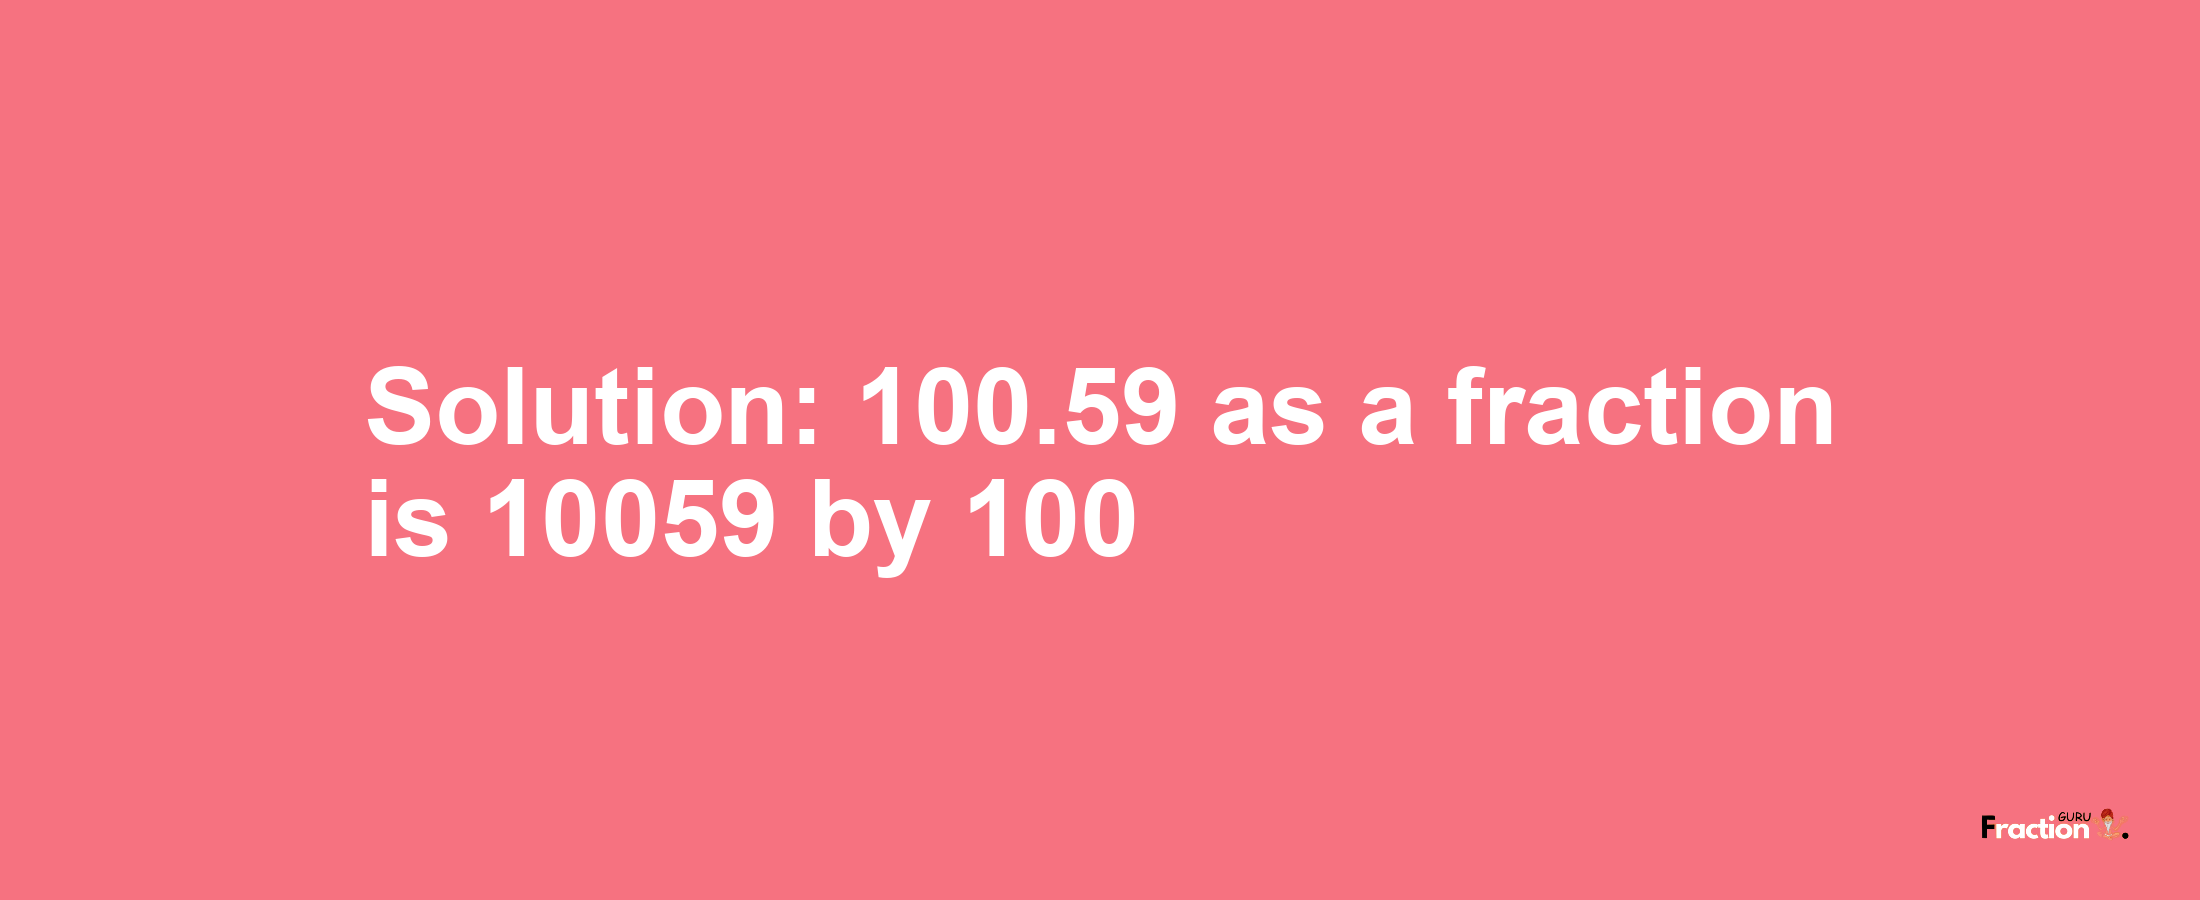 Solution:100.59 as a fraction is 10059/100